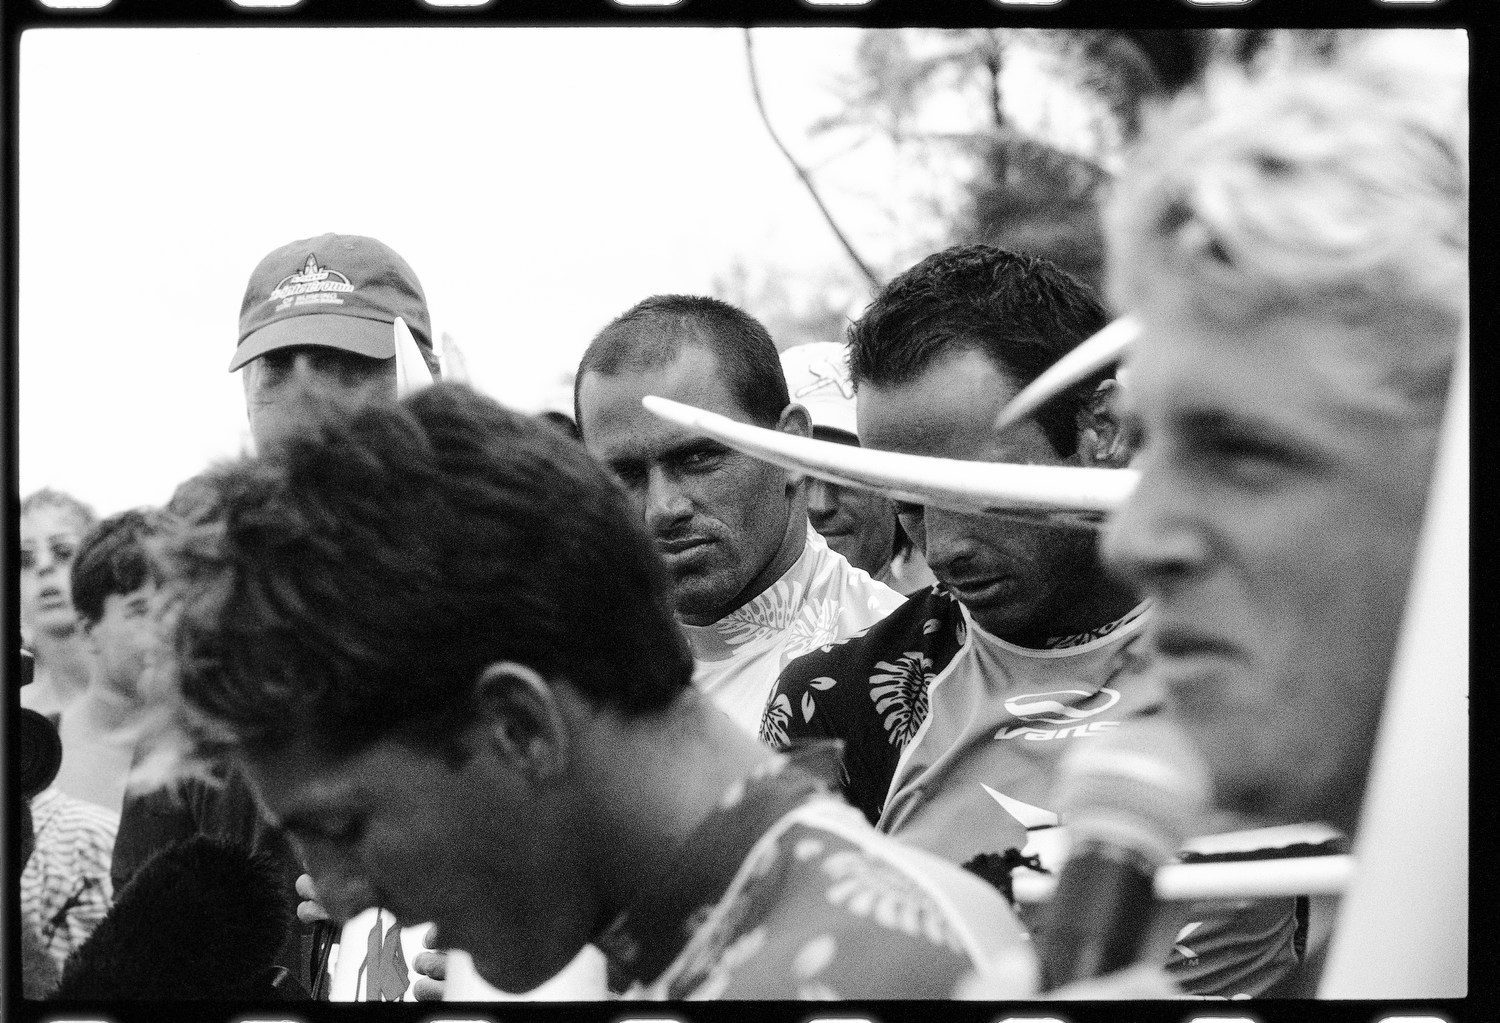 Kelly Slater, Shane Dorian, Andy Irons, Mick Fanning, for TransWorld SURF on black and white film.